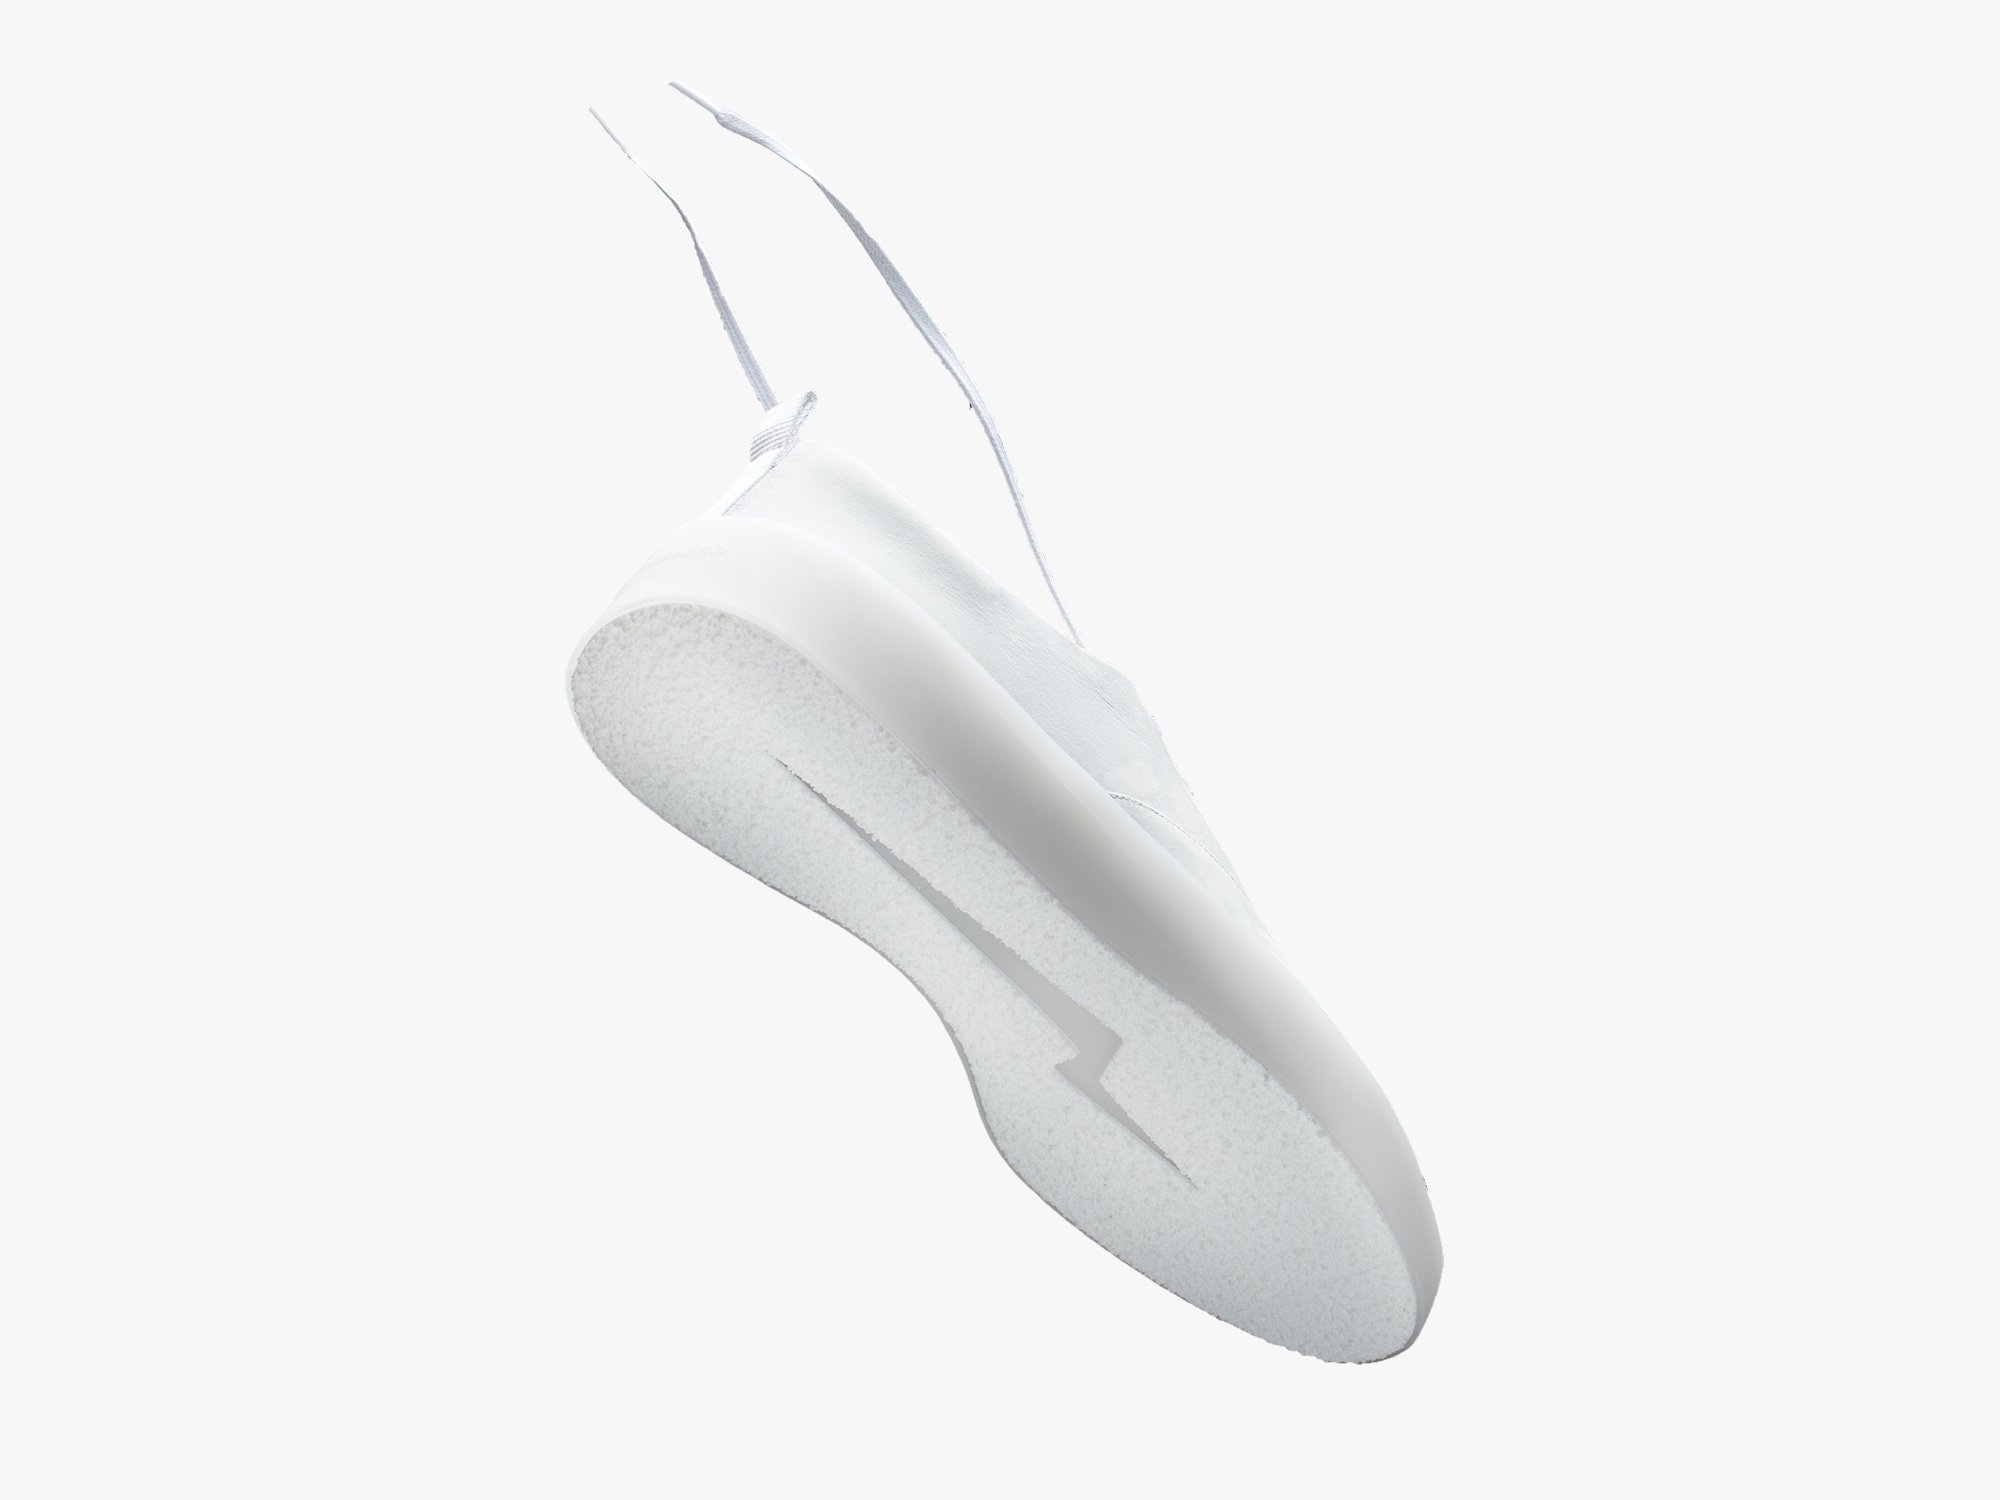 Cruise Lace up shoe in white on a white background, floating mid air, exposing the sole of the shoe